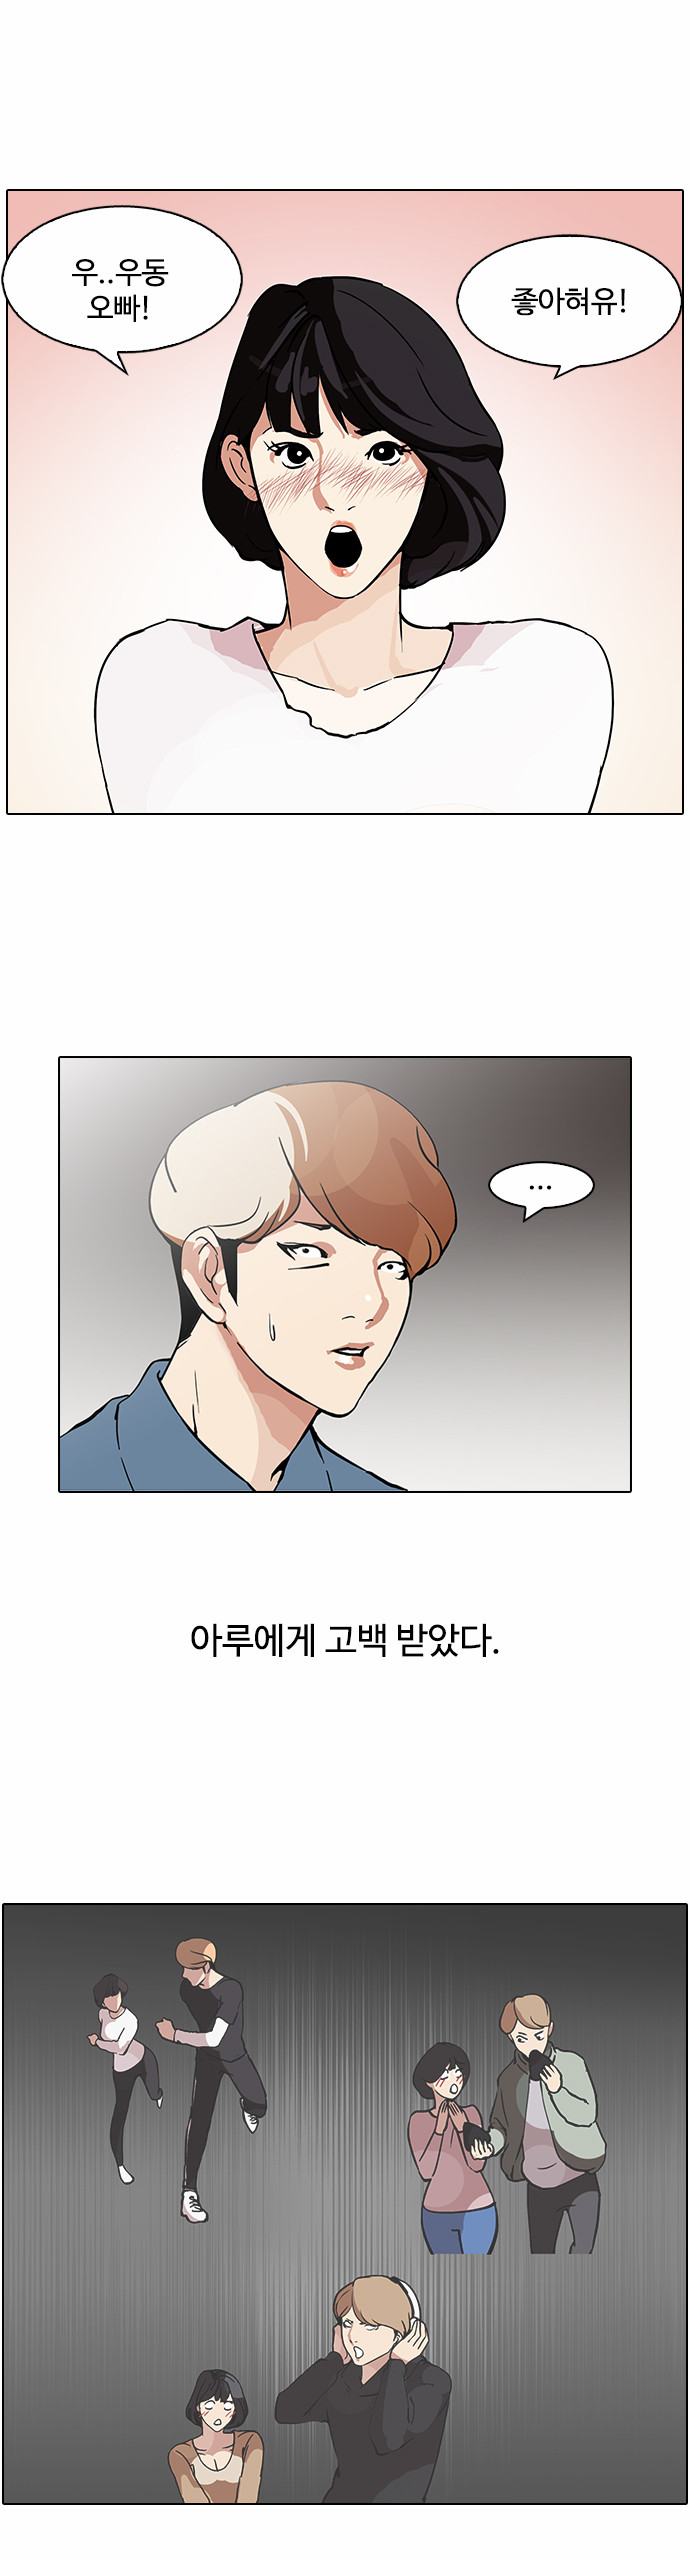 Lookism - Chapter 100 - Page 2